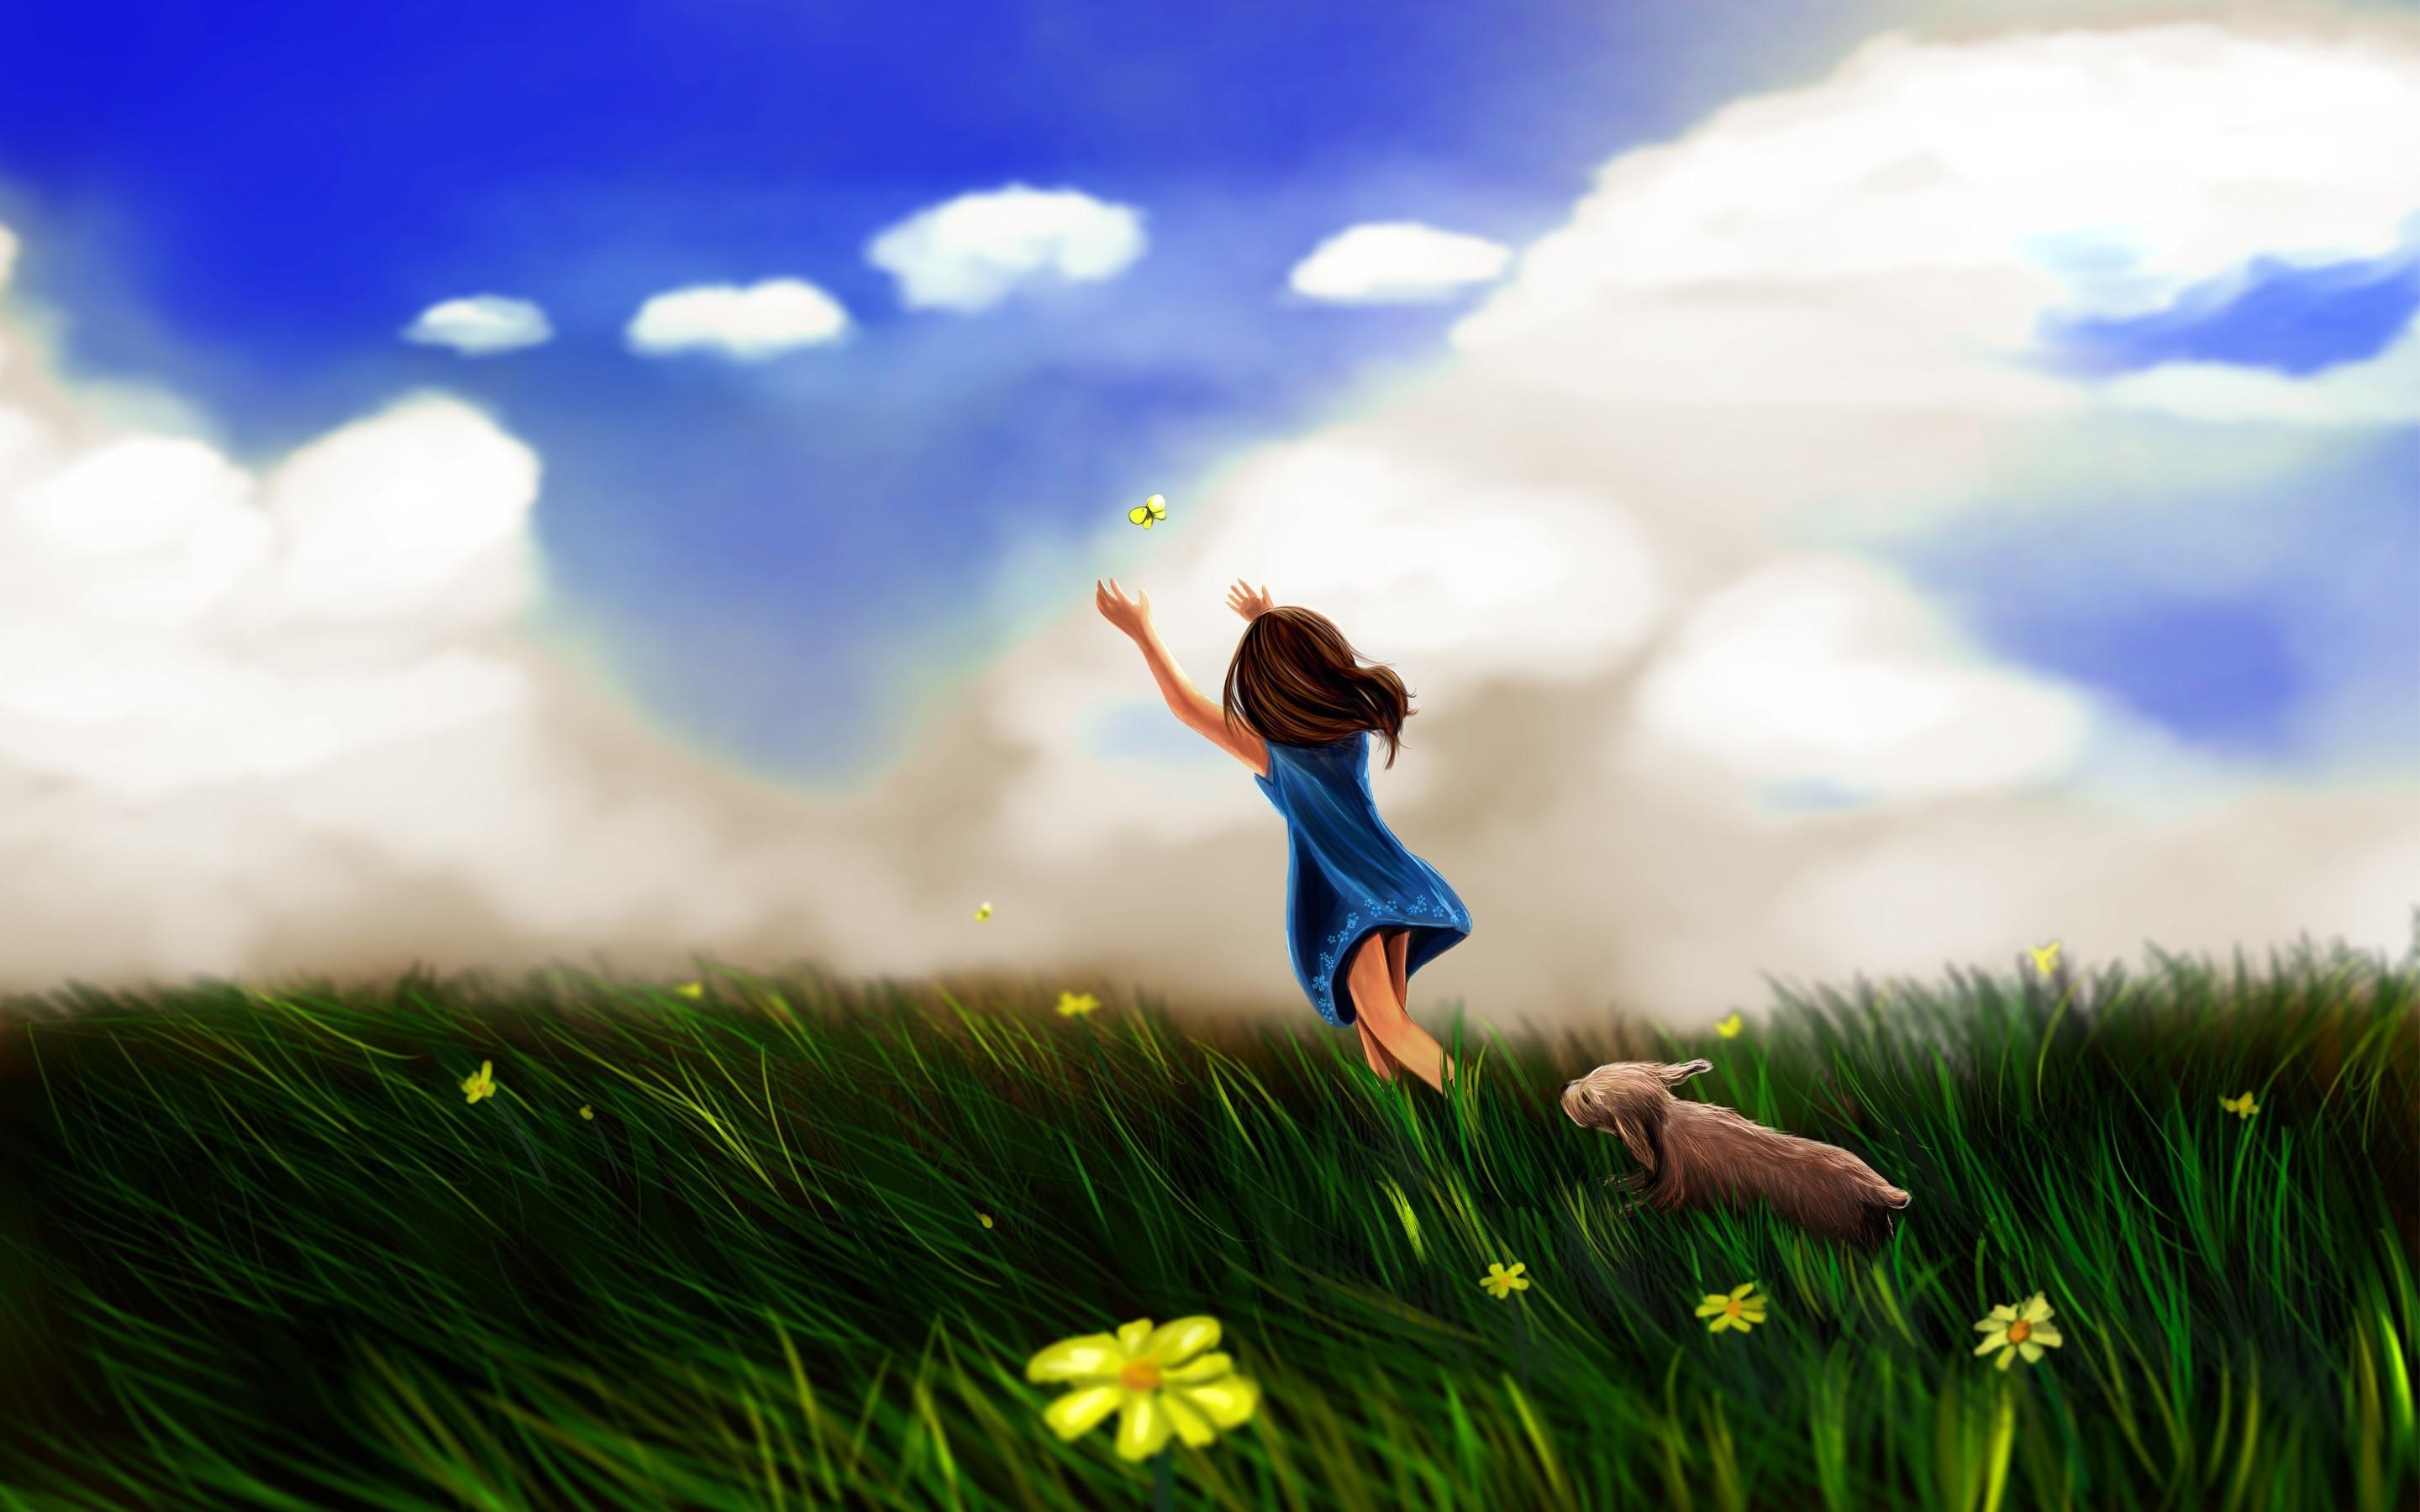 A girl chasing a butterfly Wallpaper